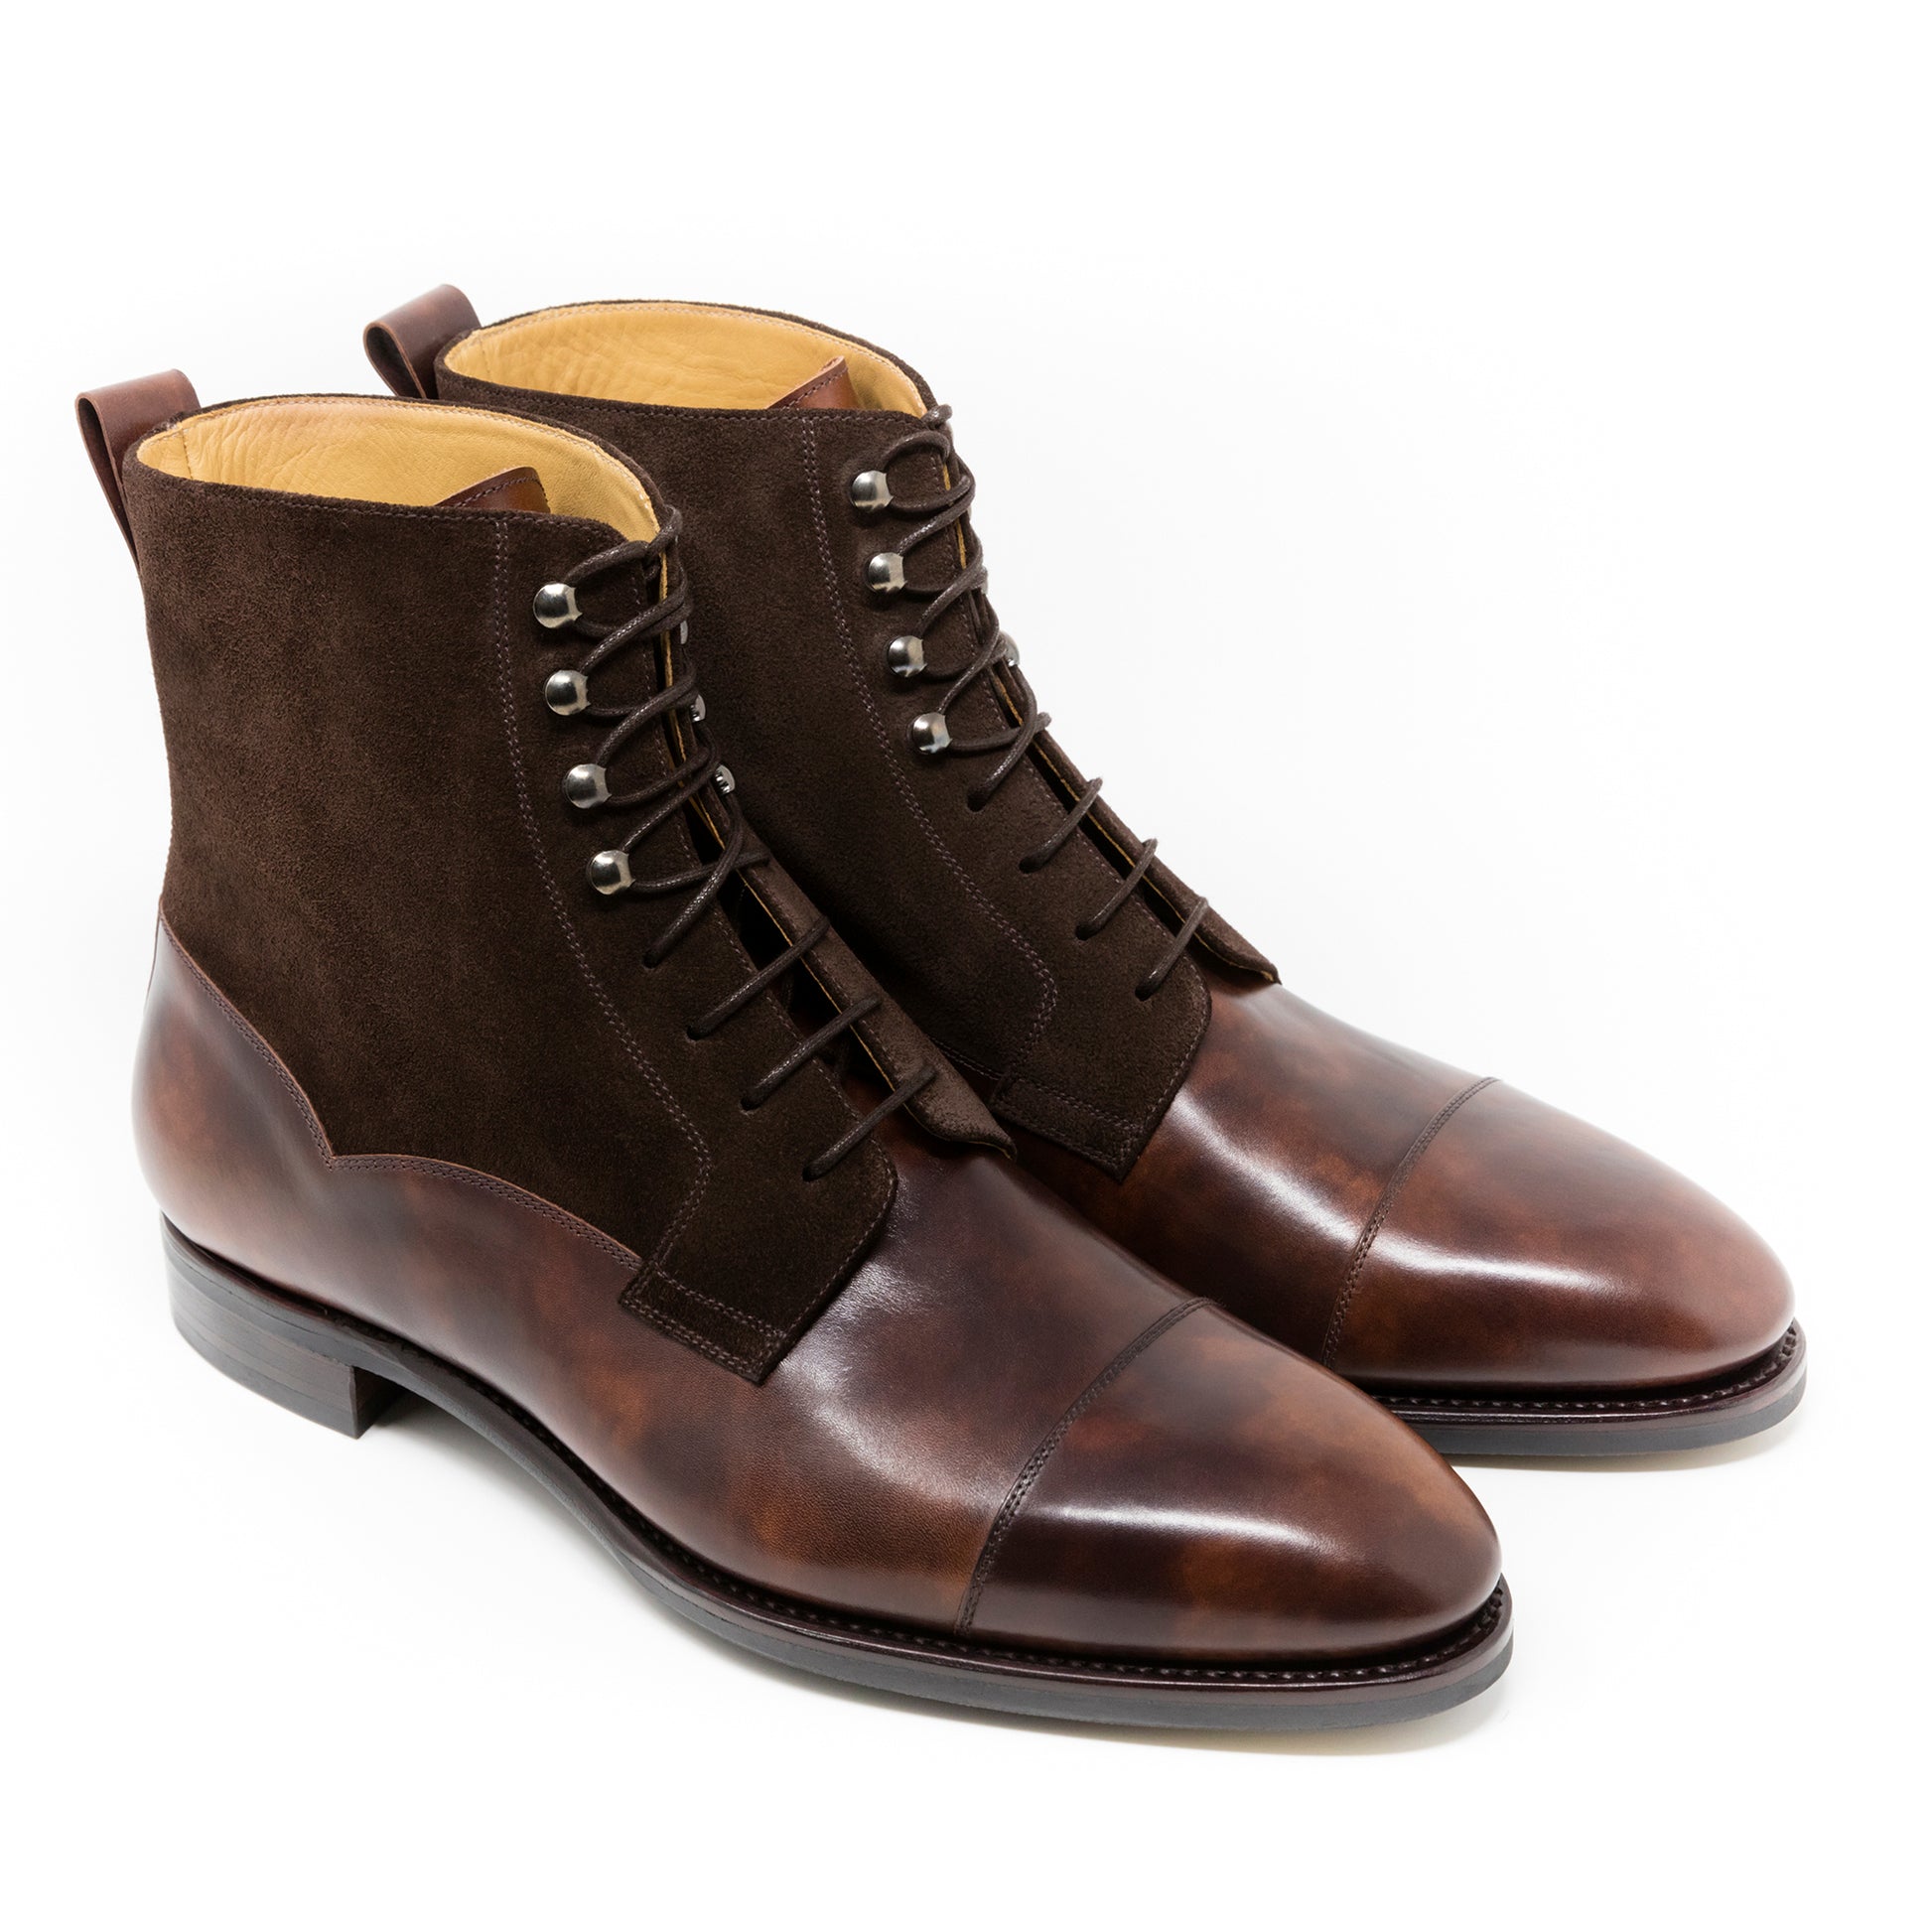 TLB Mallorca leather shoes 140 / GOYA / MUSEUM CALF BROWN & SUEDE BROWN